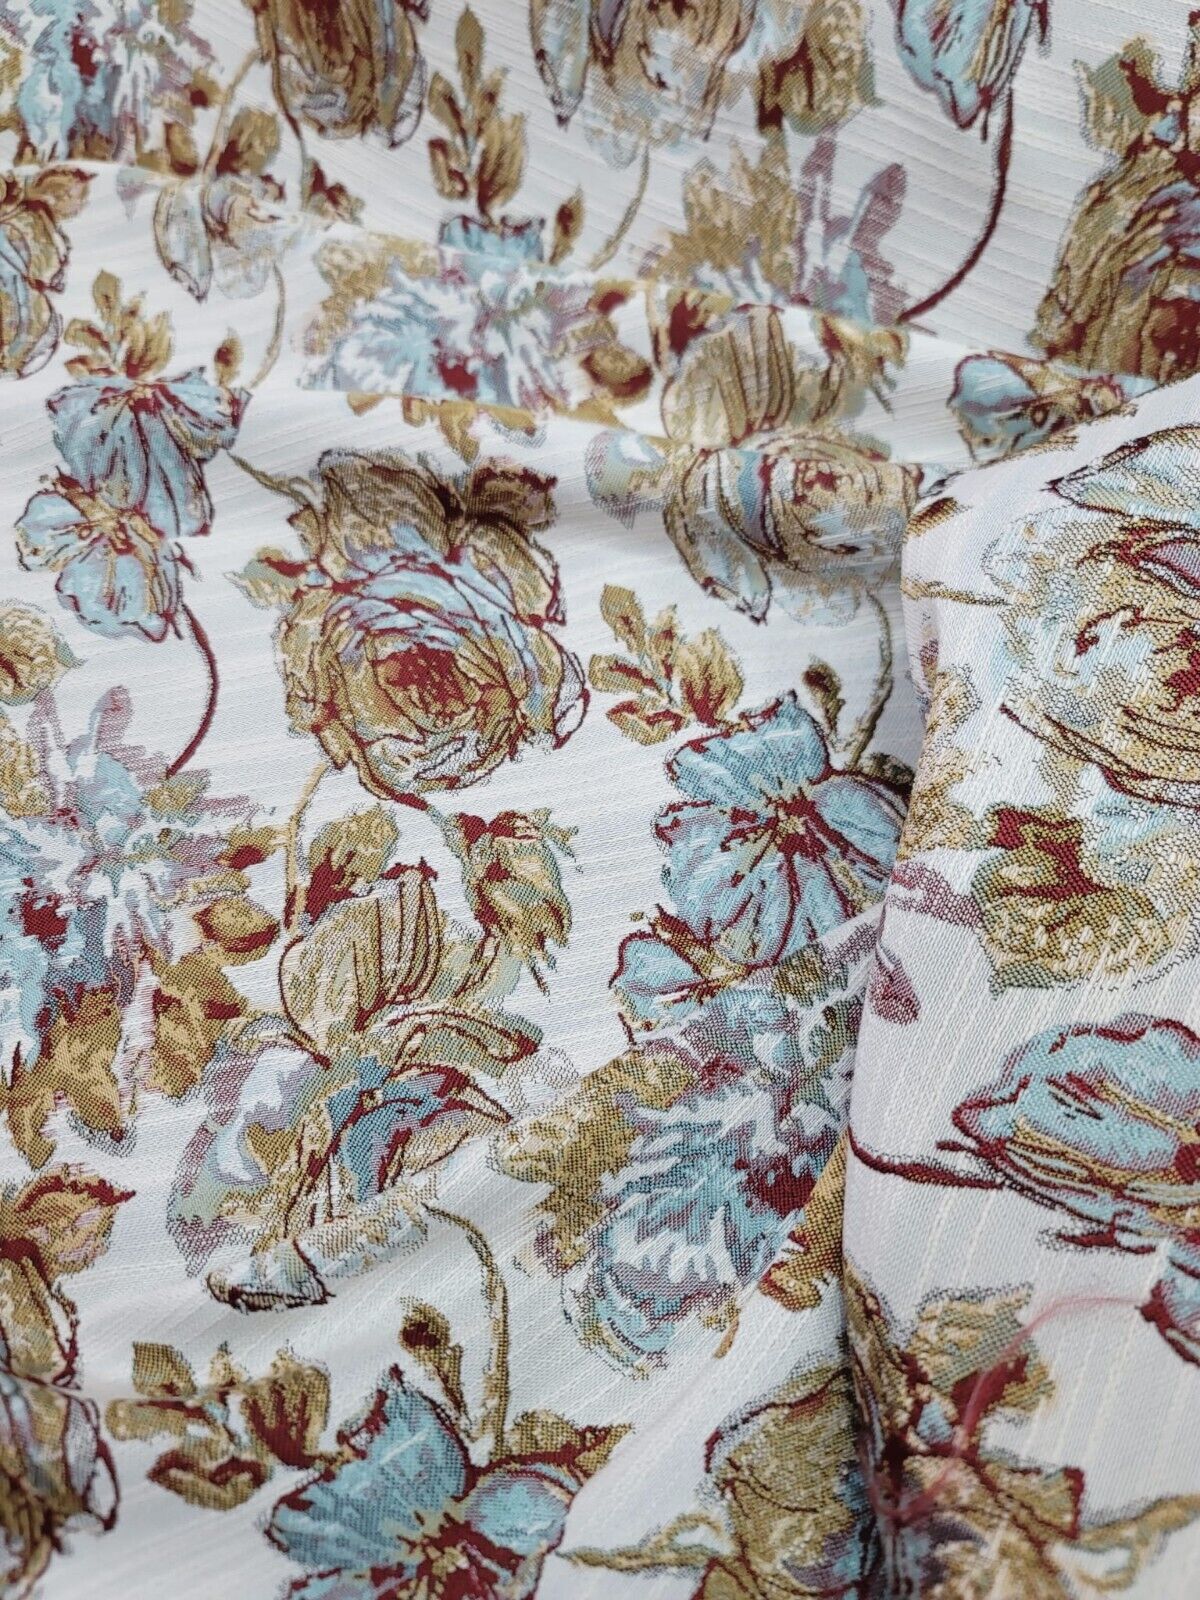 Mint Dark Gold Damask Chenille Upholstery Brocade Fabric - Sold by the Yard - Floral Pattern - 56" Width